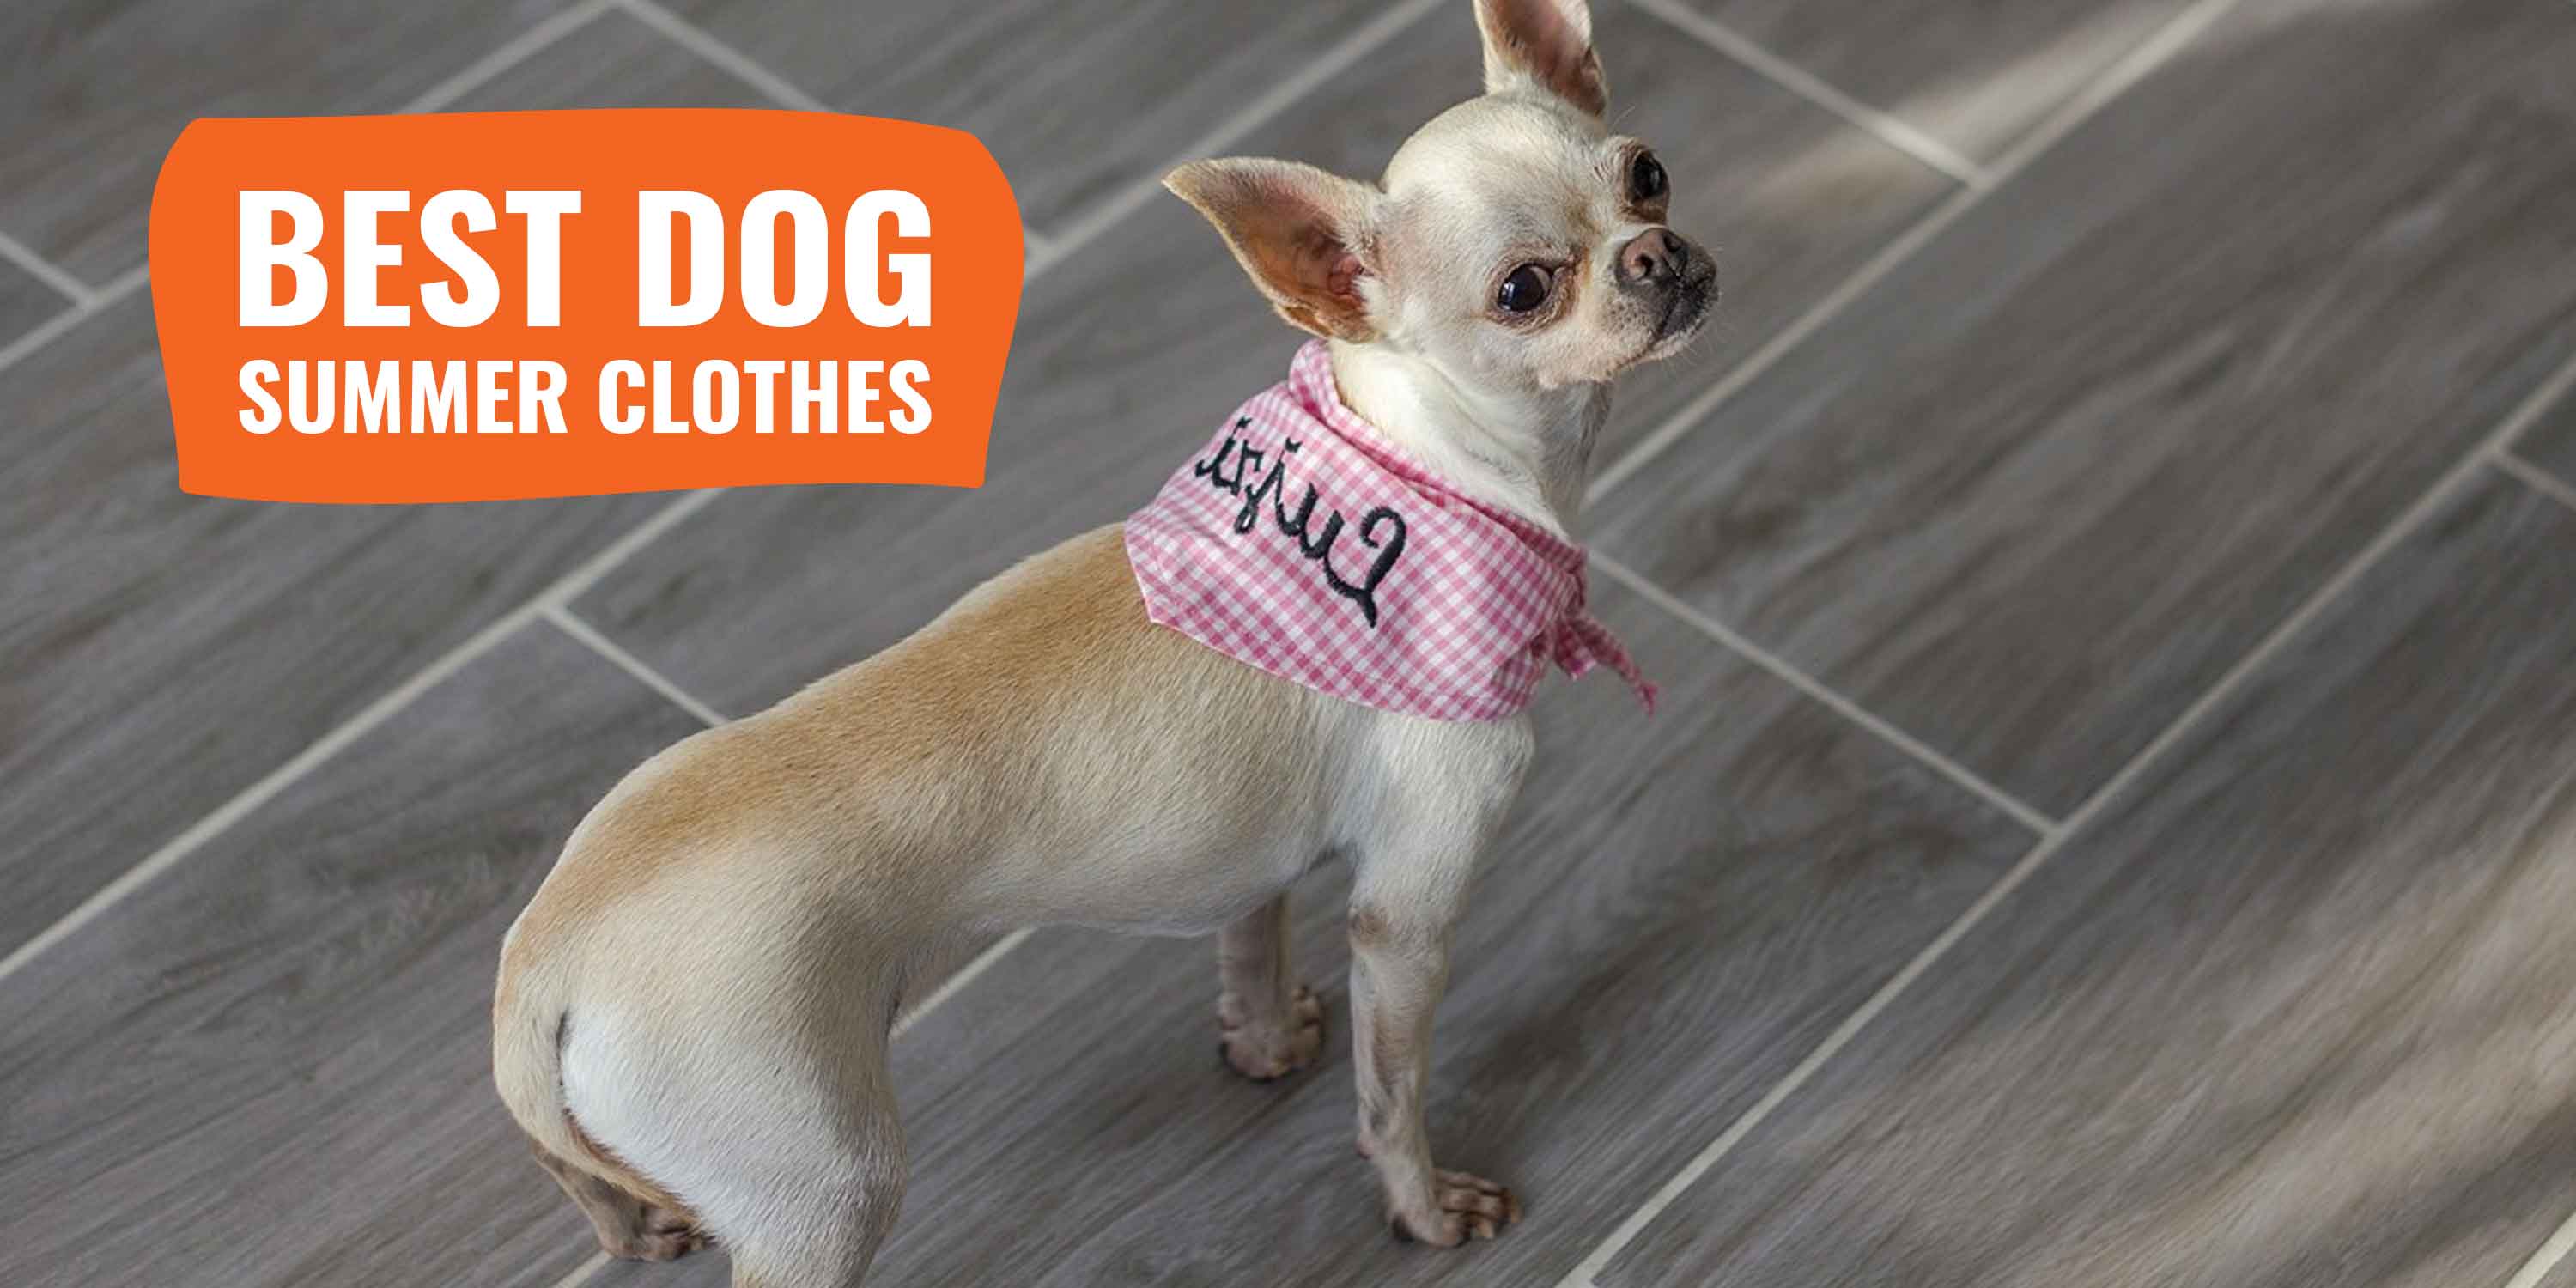 Ollypet Pink Shirt for Small Pets Dog Clothes Striped Tank Top Cotton Summer Apparel Chihuahua